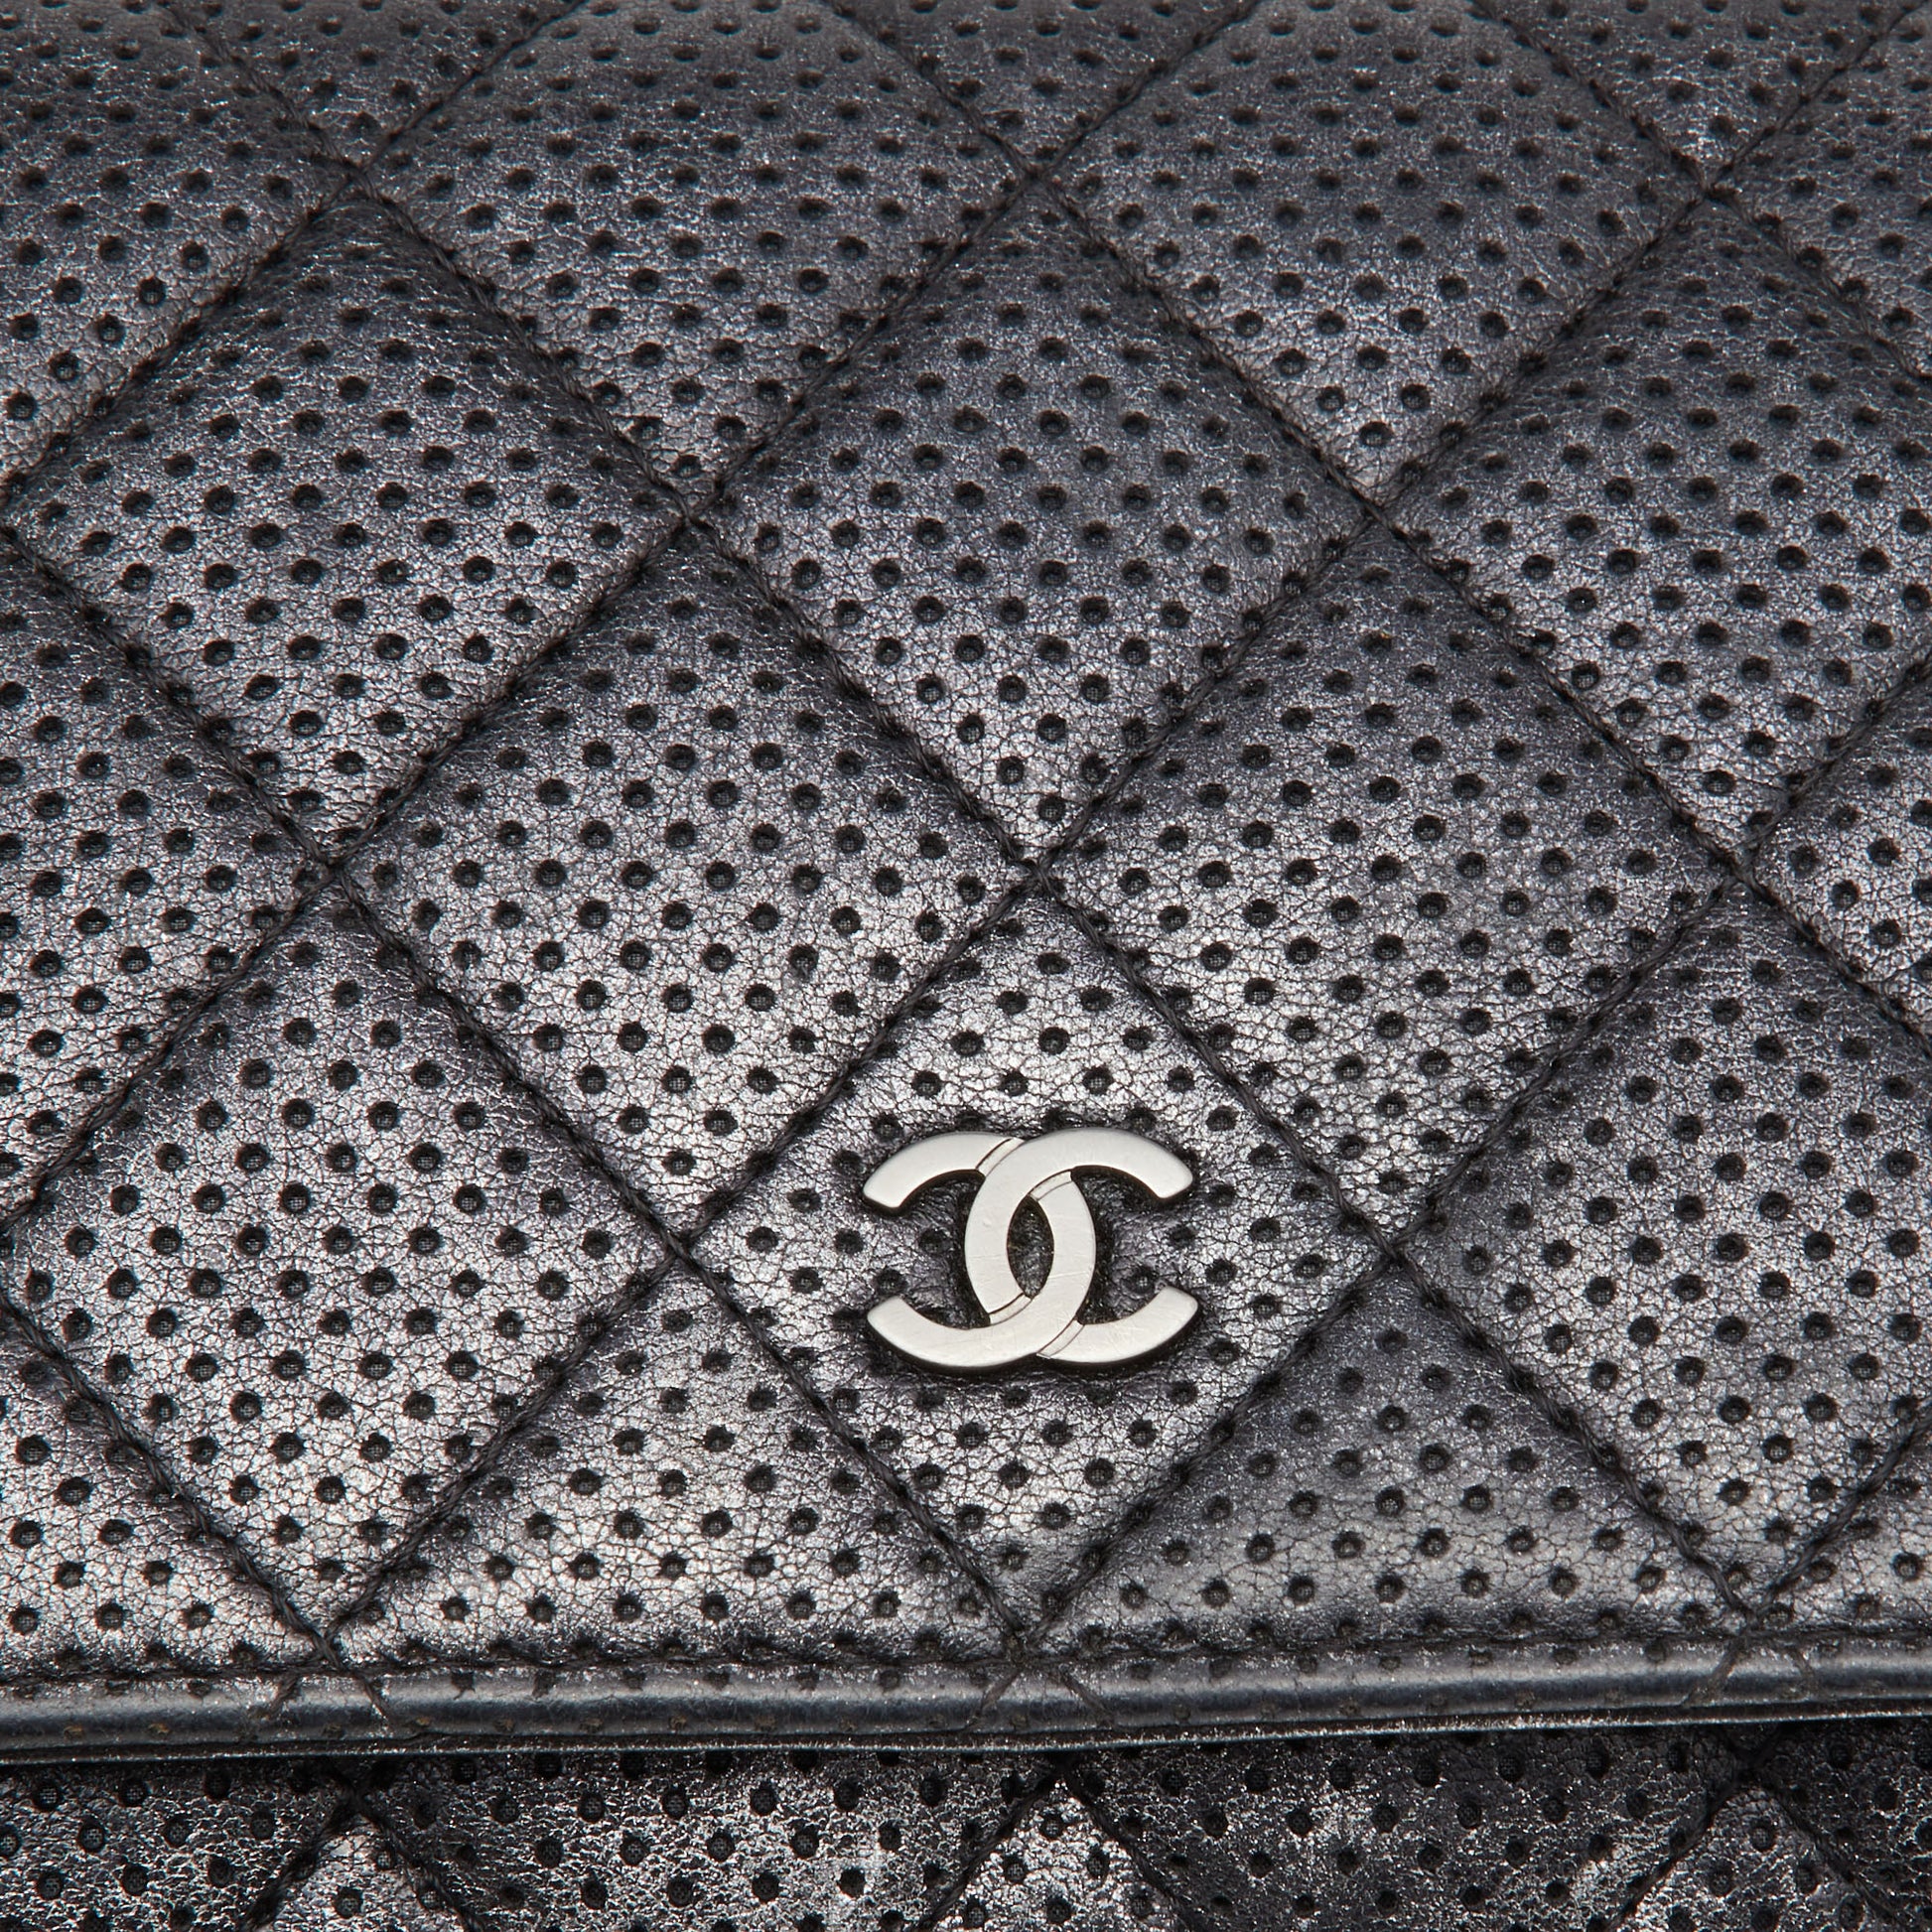 Chanel Black/Silver Quilted Perforated Leather Classic Wallet on Chain  Chanel